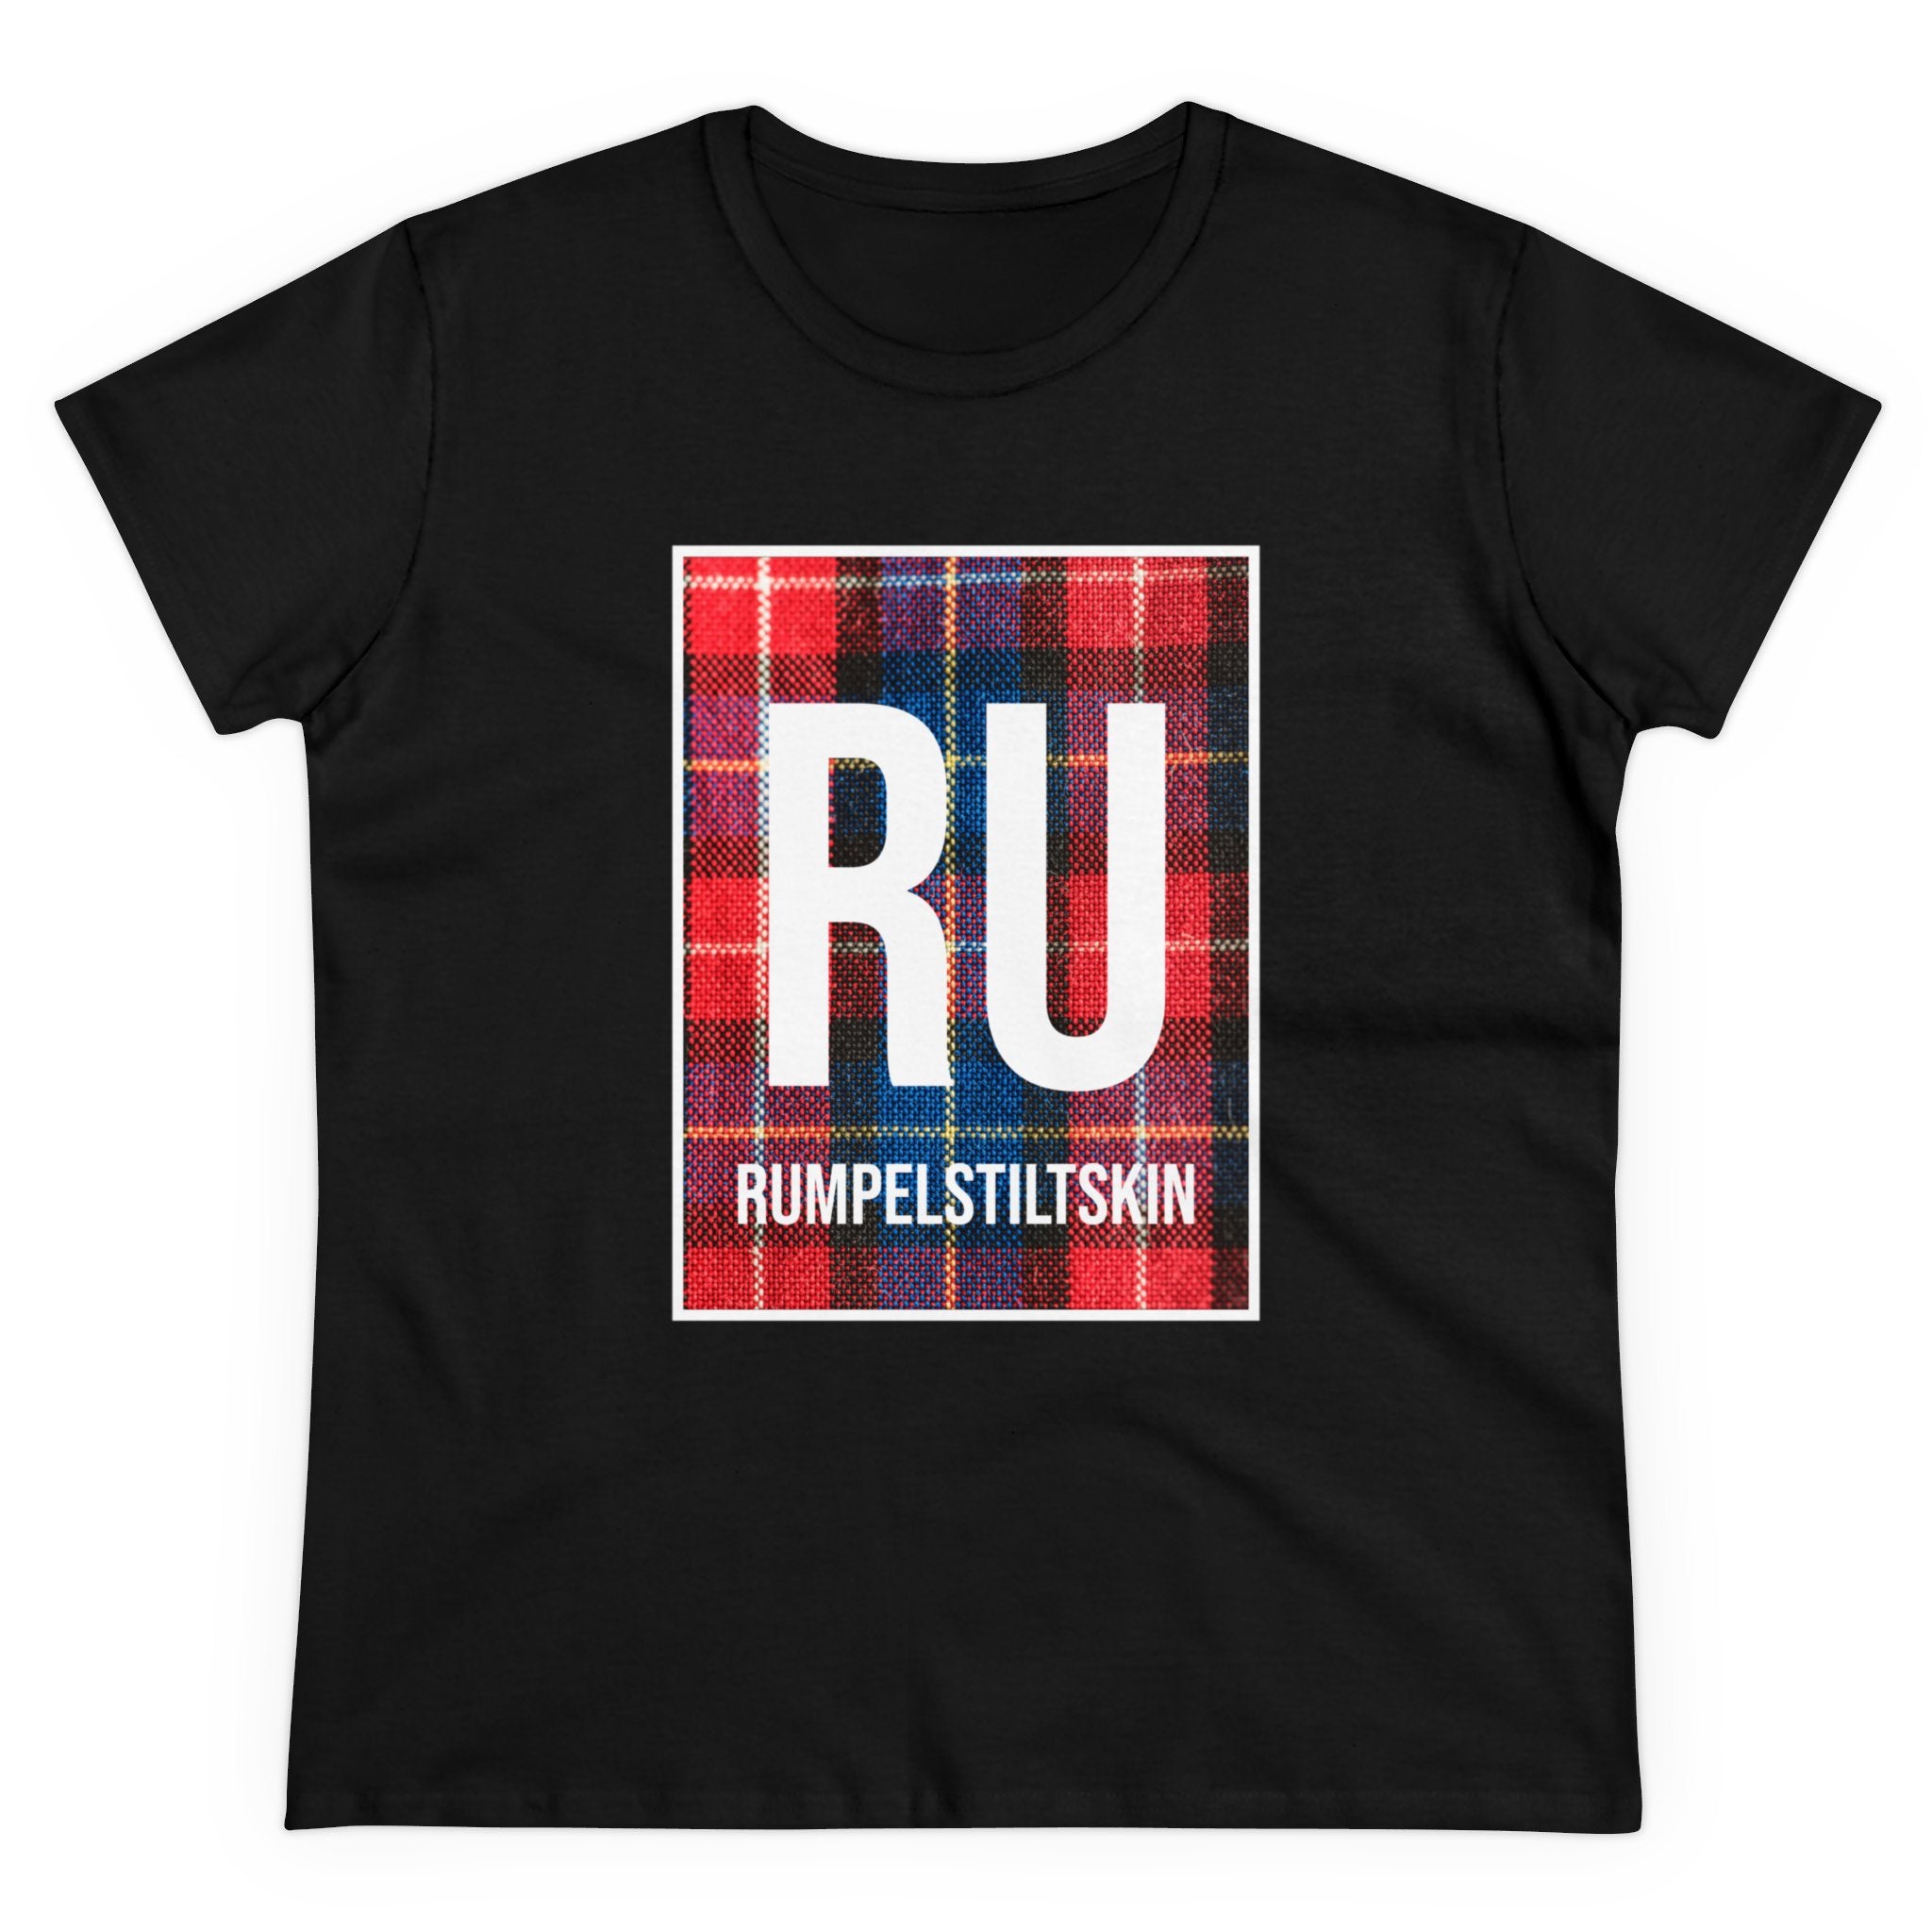 The RU - Women's Tee in black, featuring a red and black plaid patterned rectangle with large white letters "RU" and the word "Rumpelstiltskin" below it in smaller text. Made from 100% US grown cotton and ethically made, this stylish shirt offers both comfort and conscientious fashion.